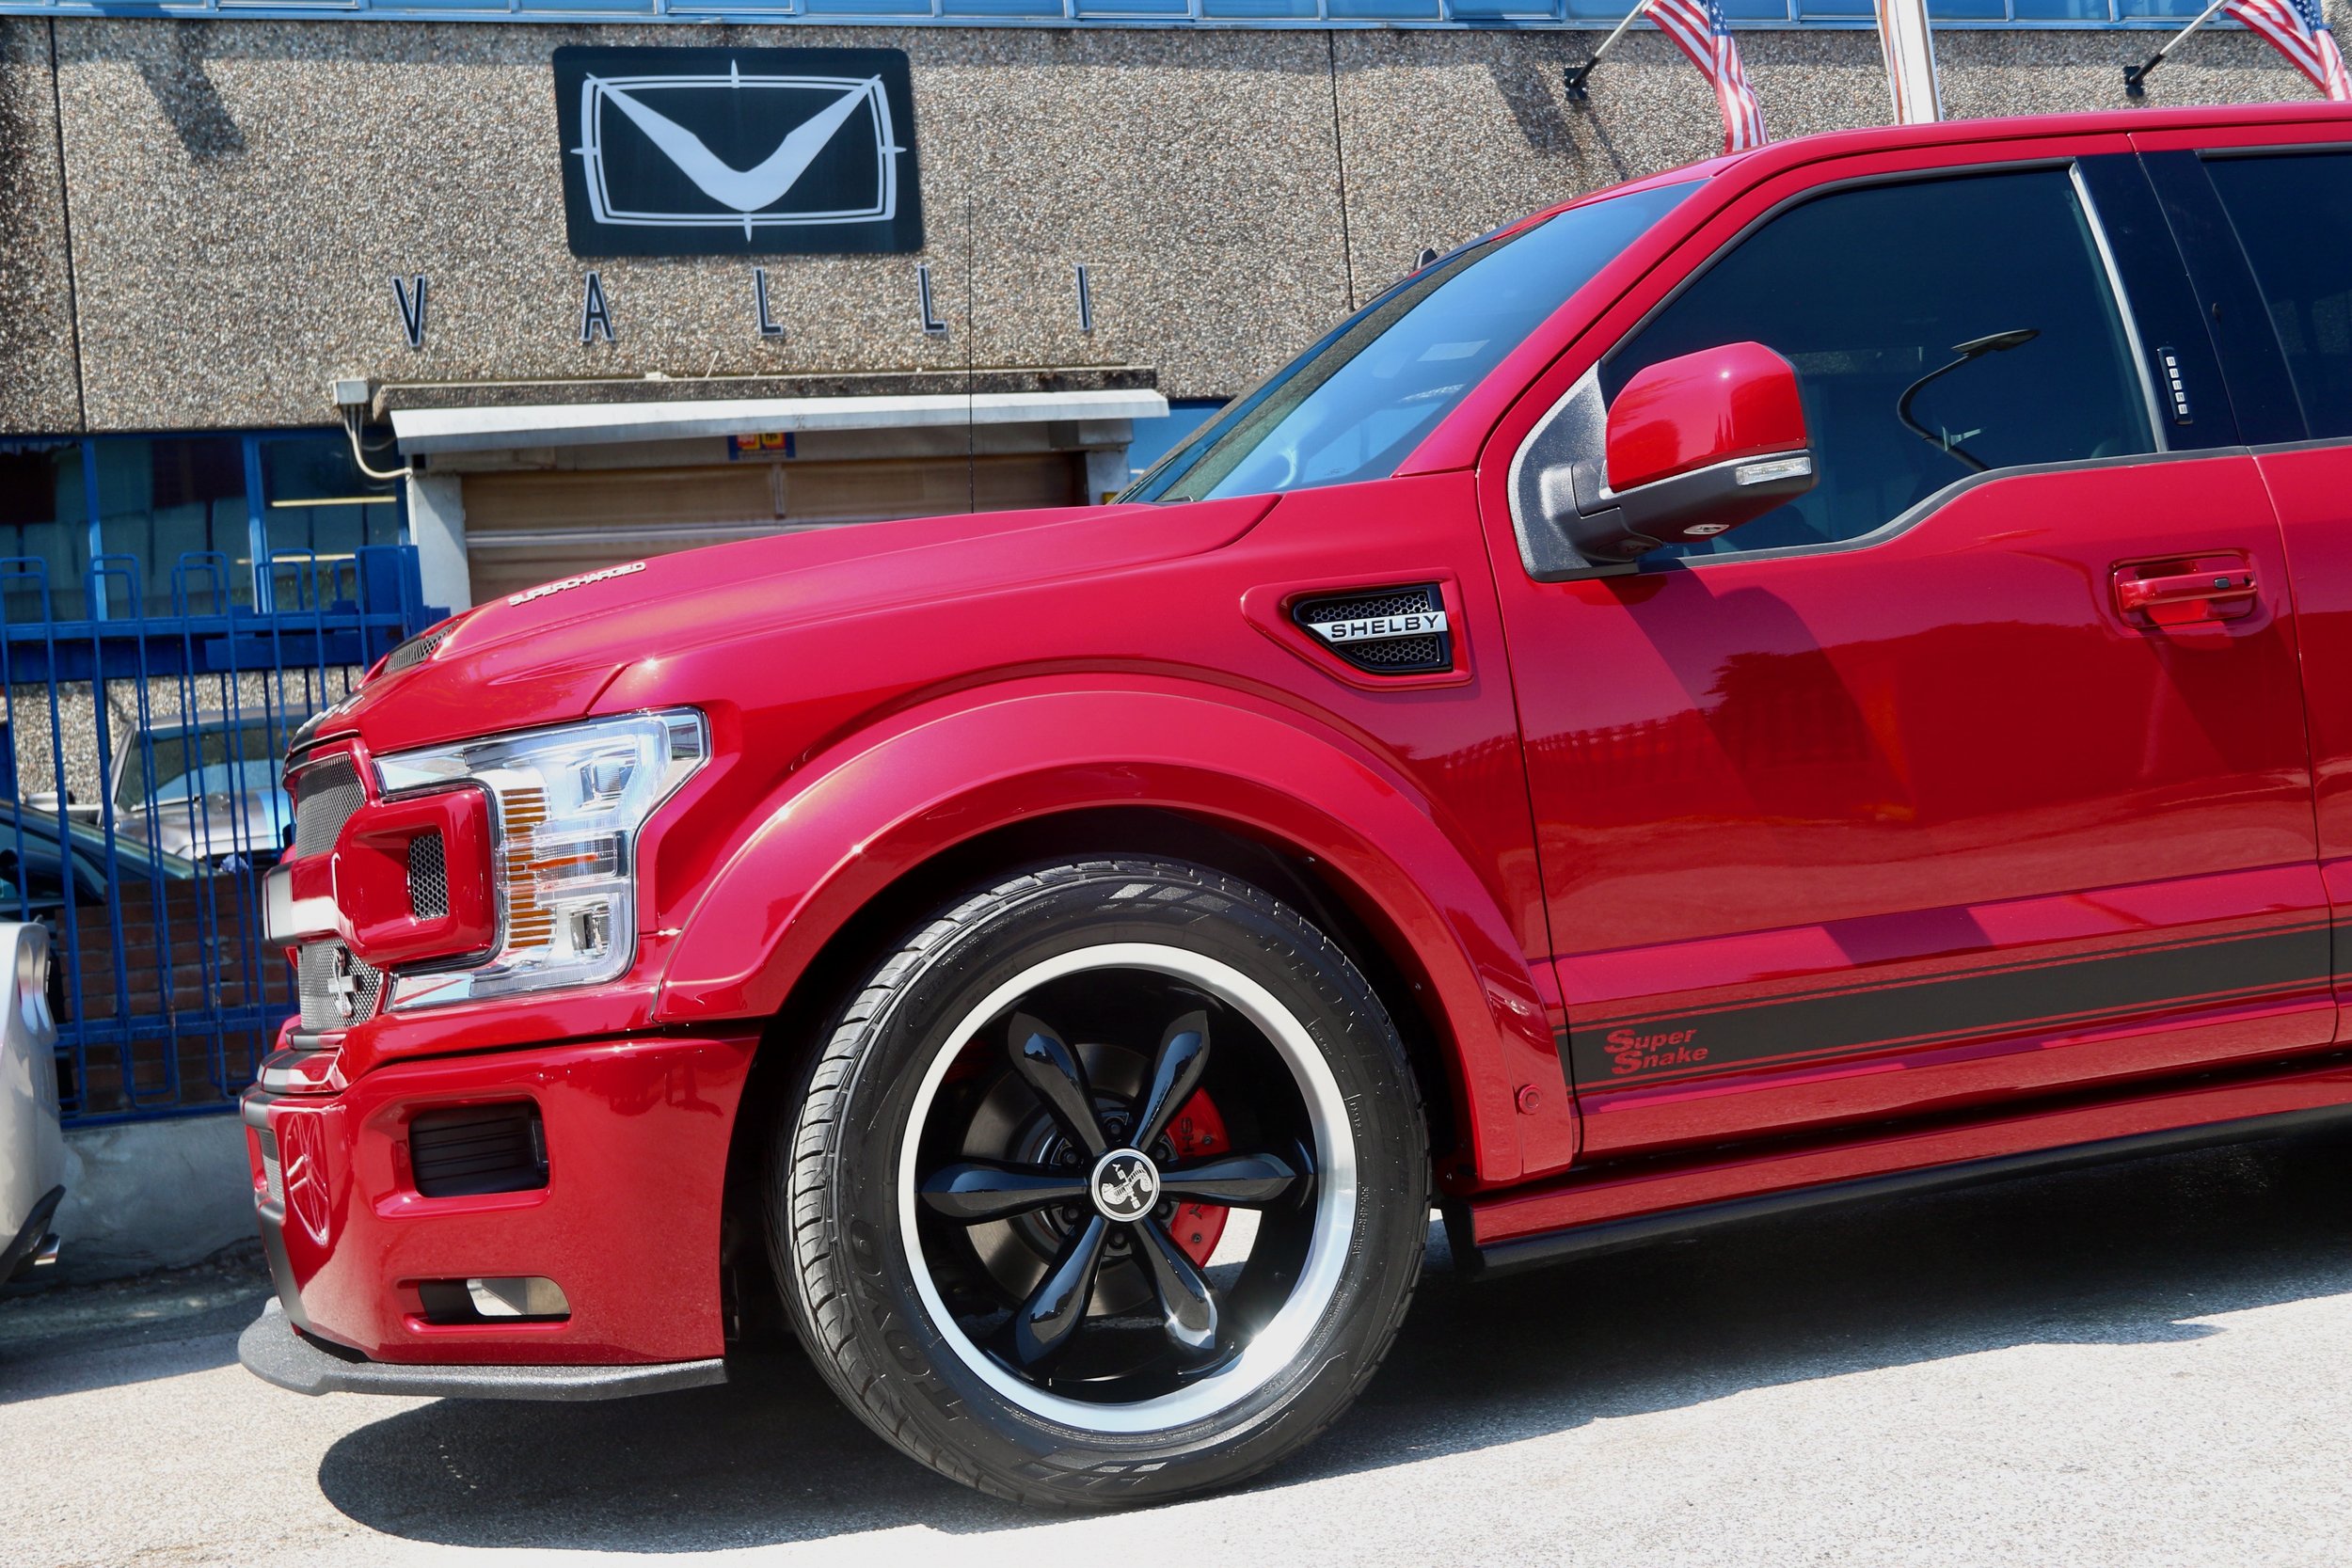 12 2020 Ford F150 Shelby Super Snake C.S.M. 20STS0259 Rapid Red VALLIstore Wide-Body.jpeg